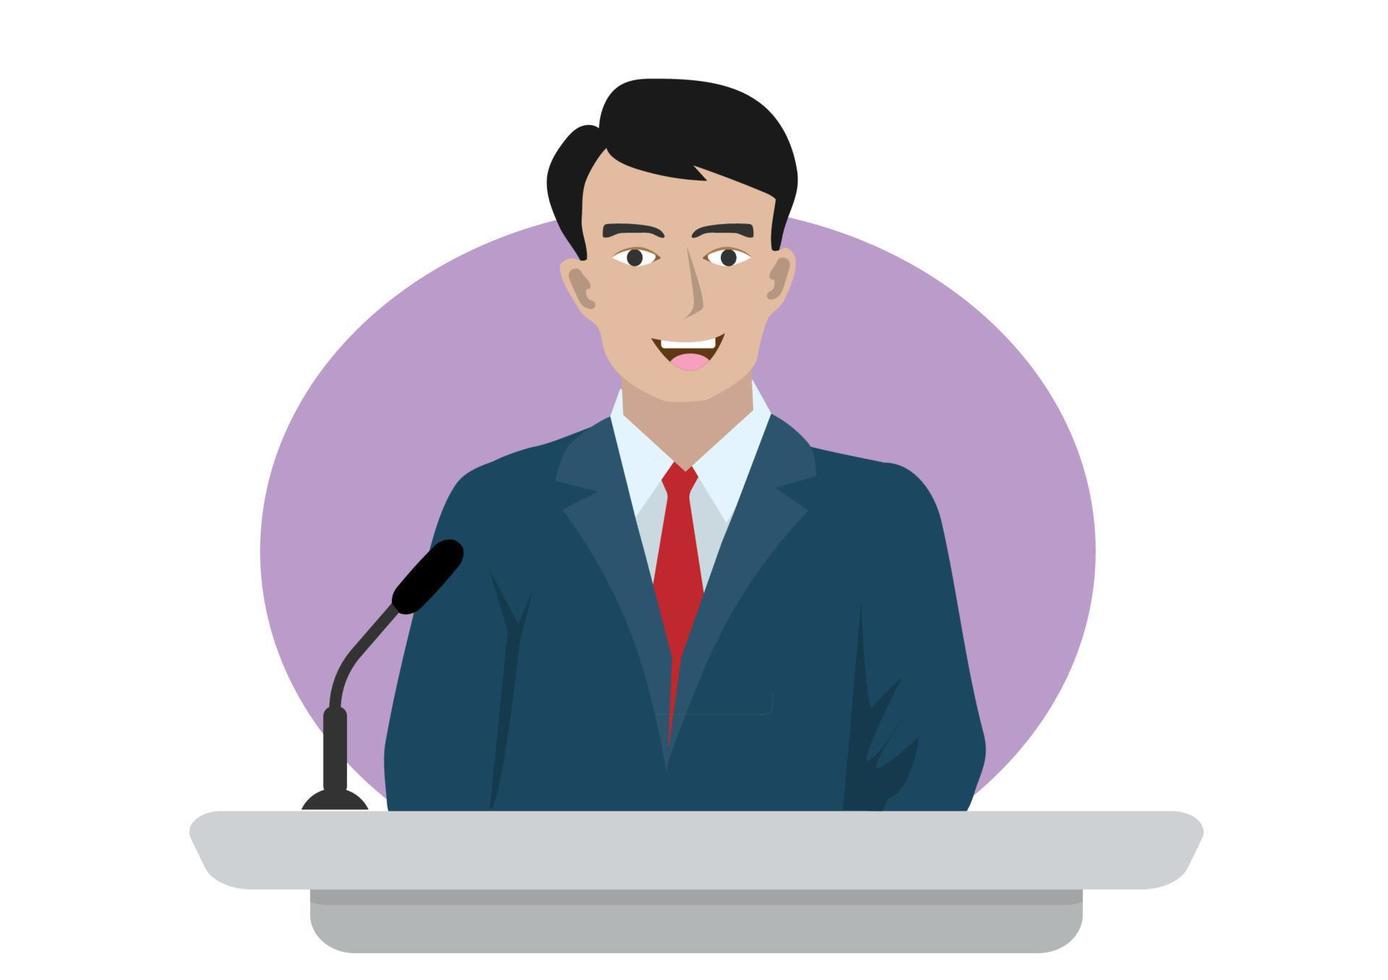 The lecturer stands behind the rostrum. The speaker lectures and gestures. A young politician speaks to the public. Flat cartoon illustration. vector